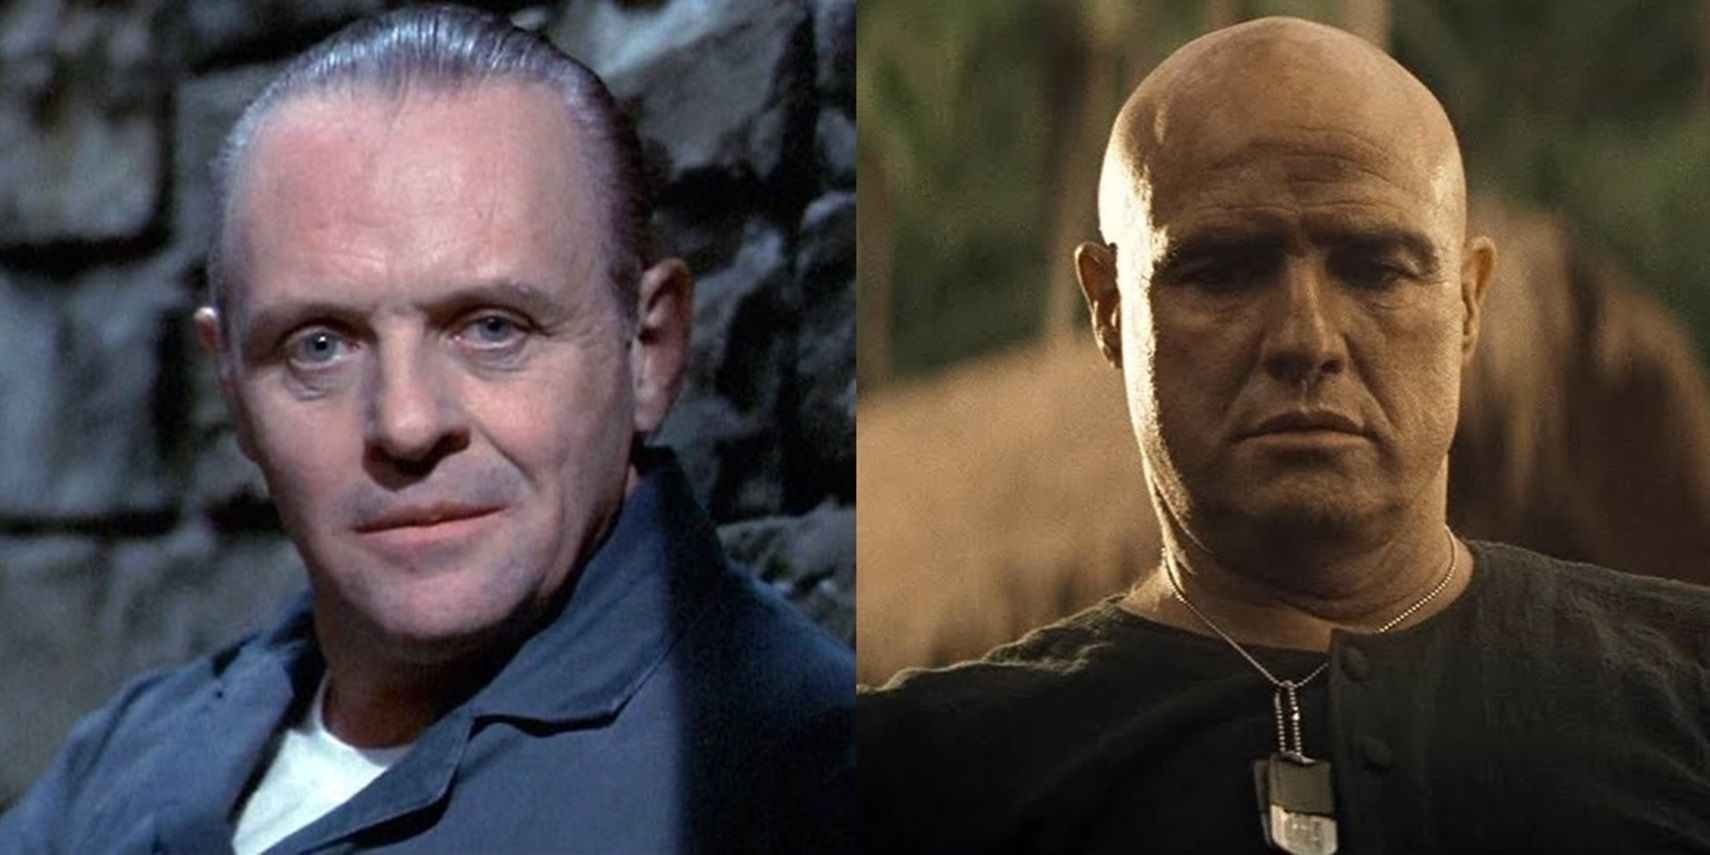 Split image of Anthony Hopkins in The Silence of the Lambs and Marlon Brando in Apocalypse Now